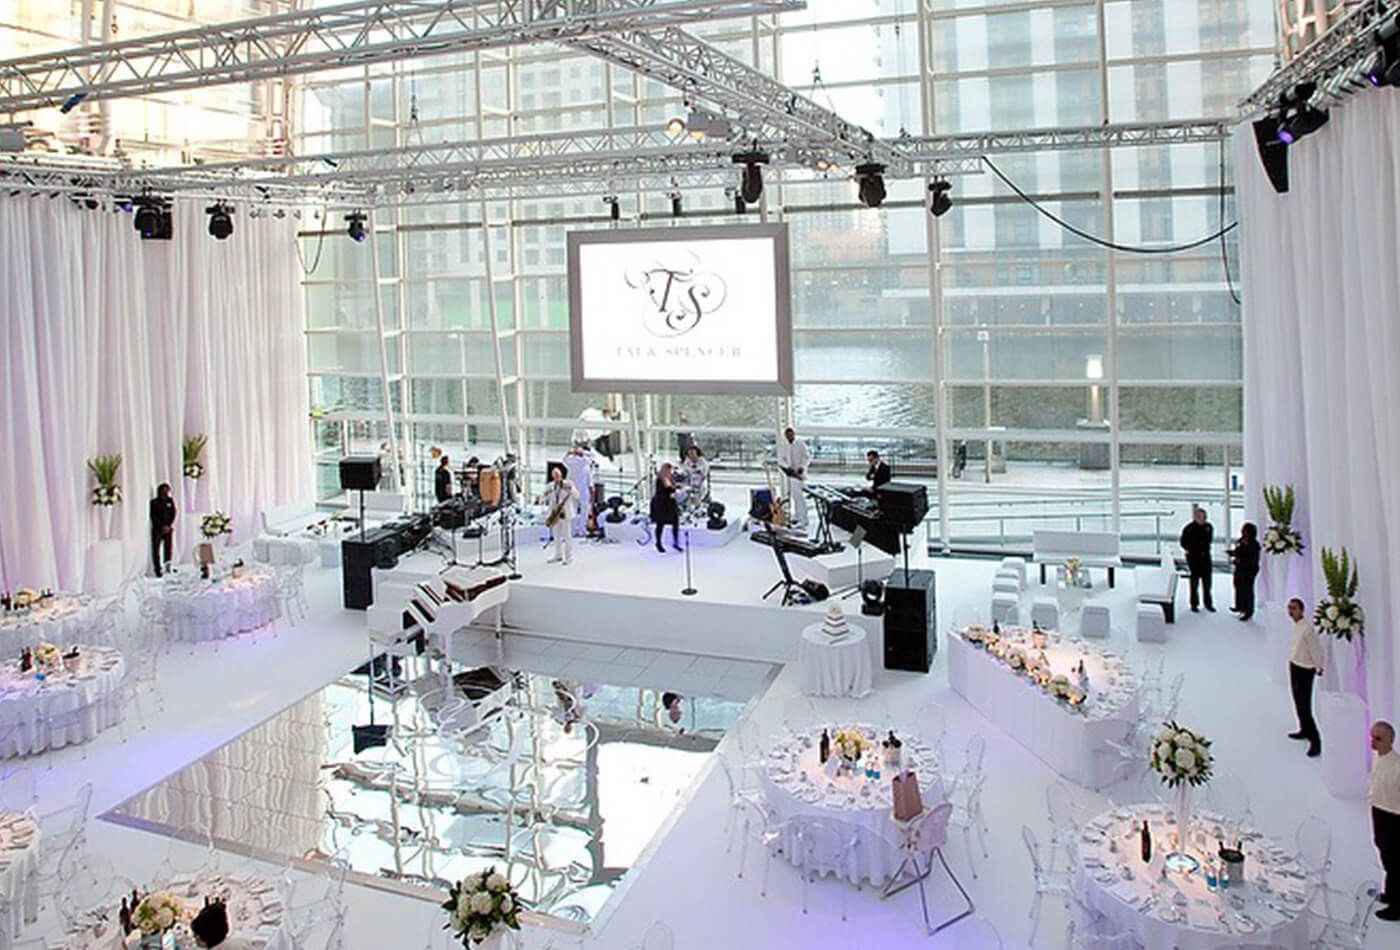 Completely white wedding set up, dining tables and stage